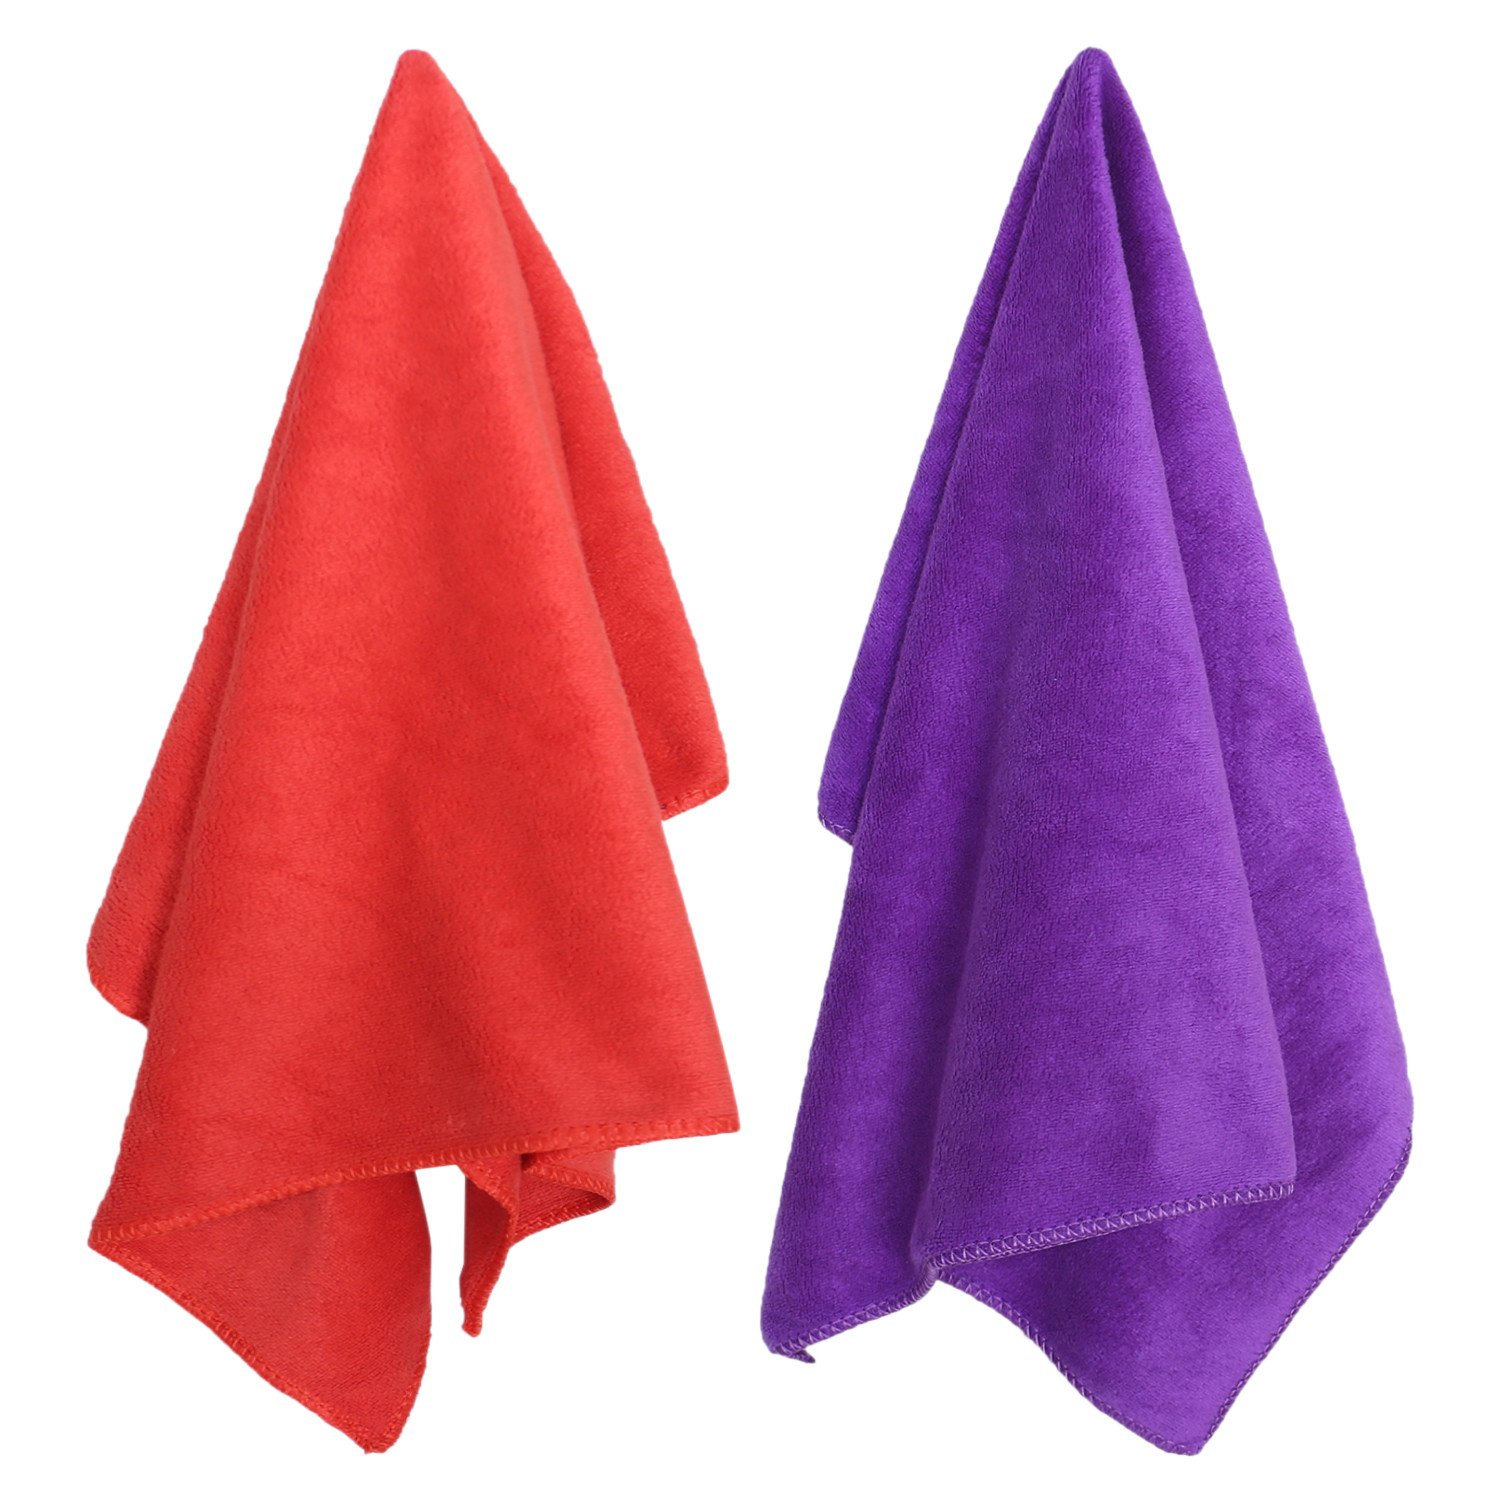 Kuber Industries Cleaning Cloths|Microfiber Highly Absorbent Wash Towels for Kitchen,Car,Window,24 x 16 Inch,Pack of 2 (Red & Purple)